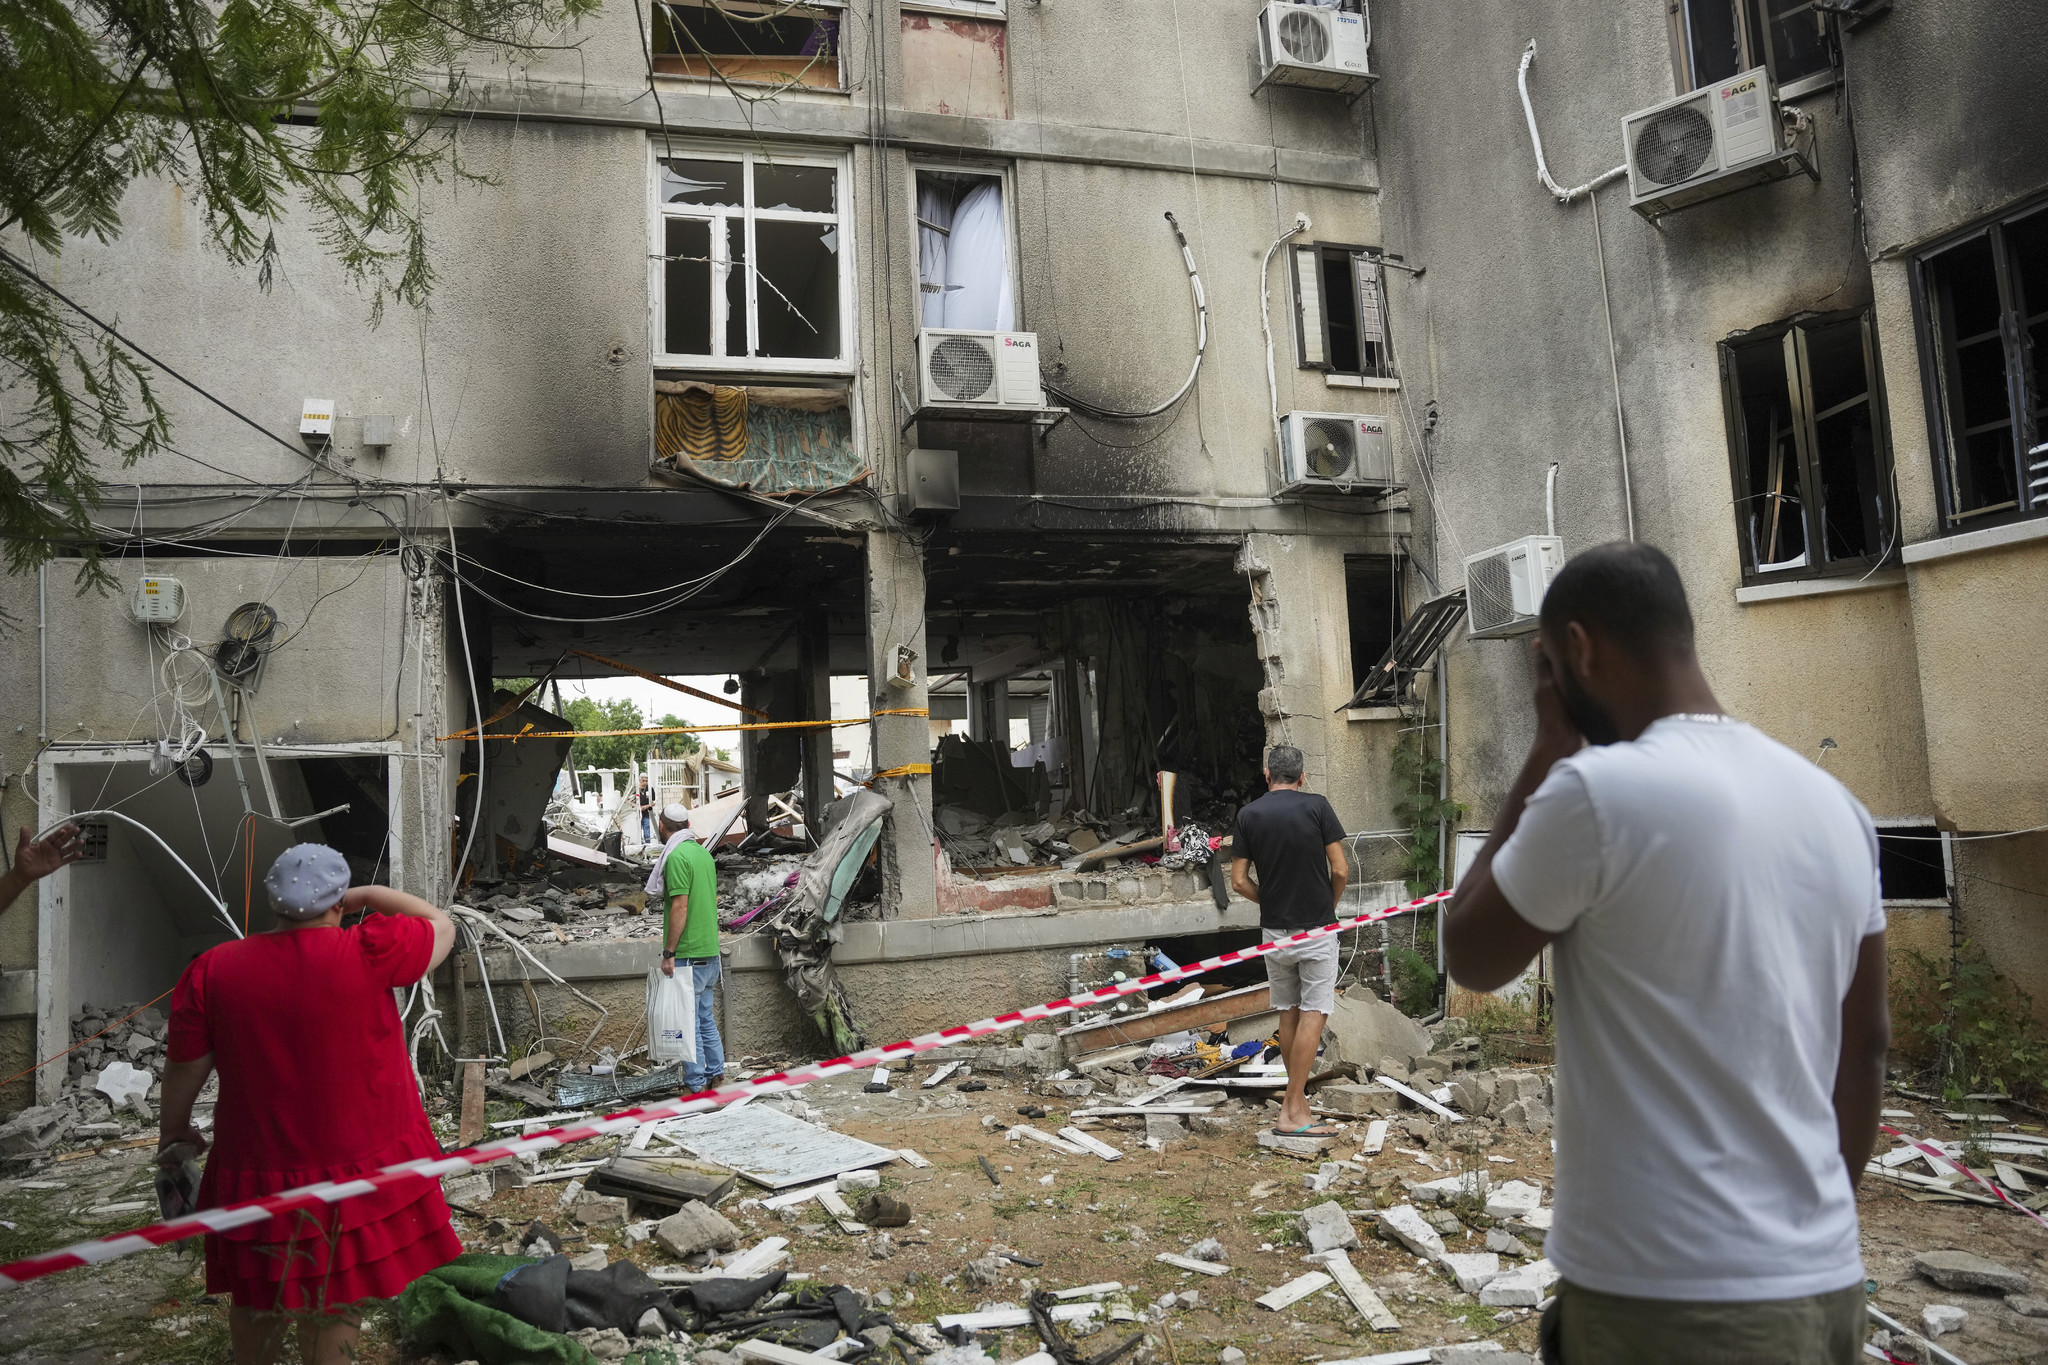 Israelis inspect a damaged residential building after it was hit by a rocket fired from the Gaza Strip, in Ashkelon, Israel.